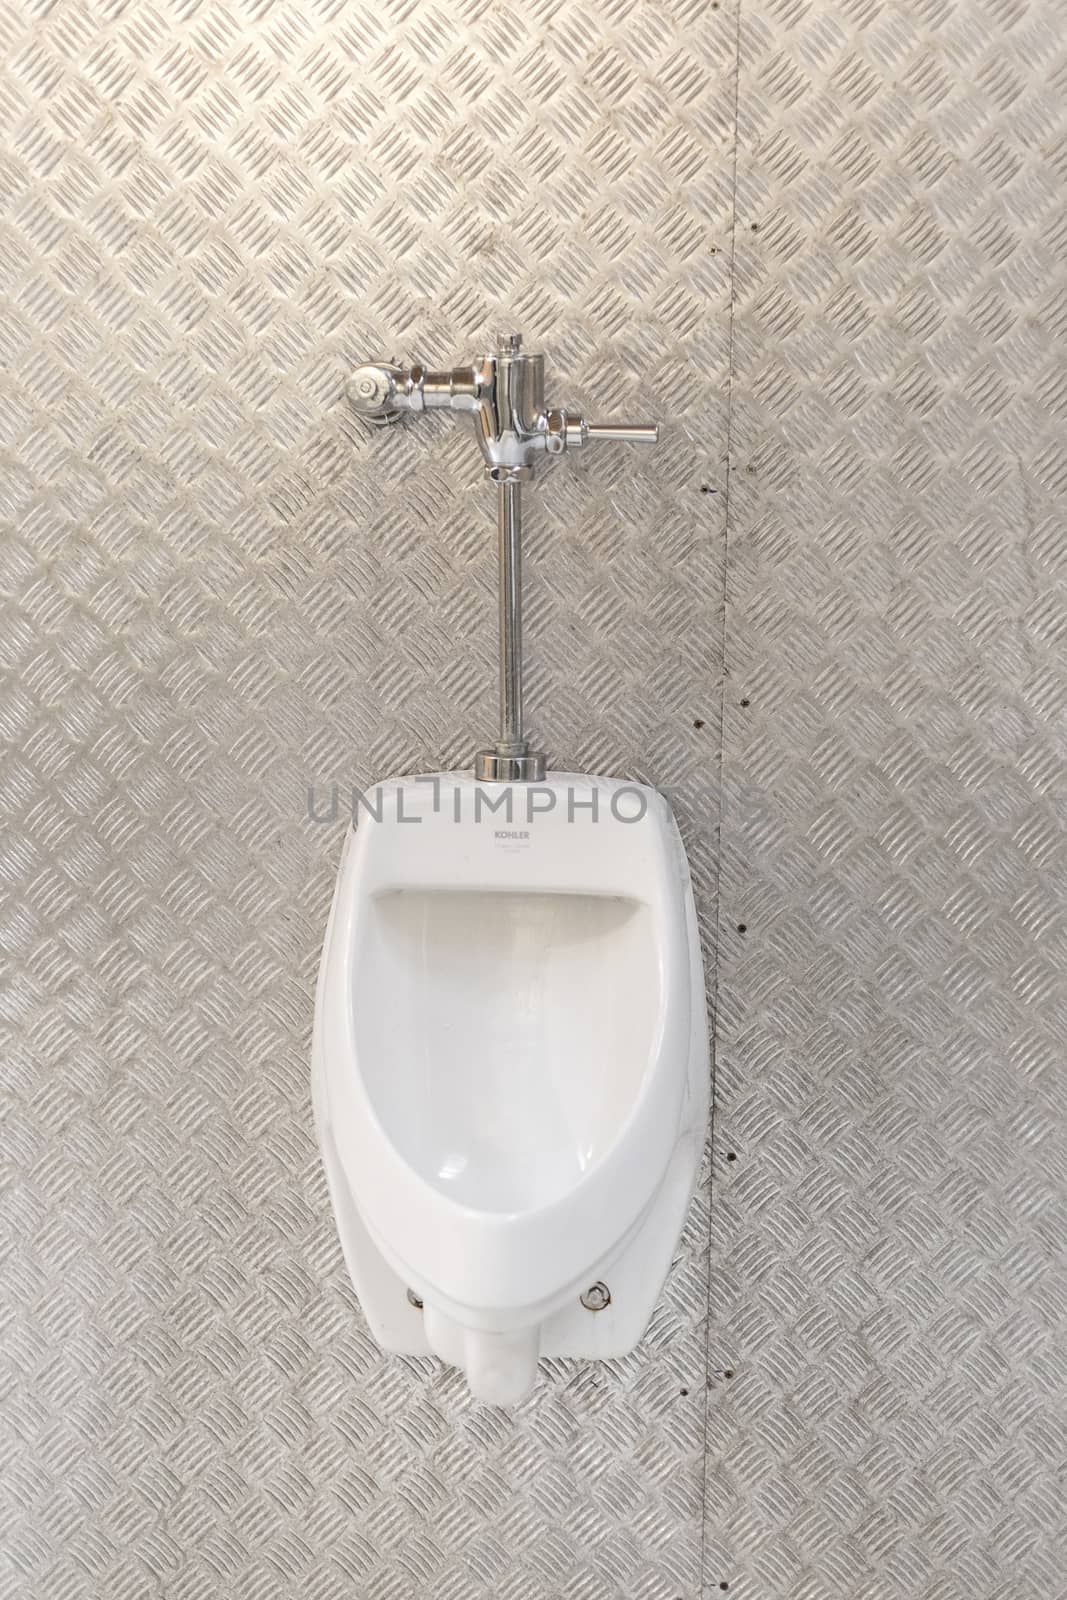 Man toilet with metal wall